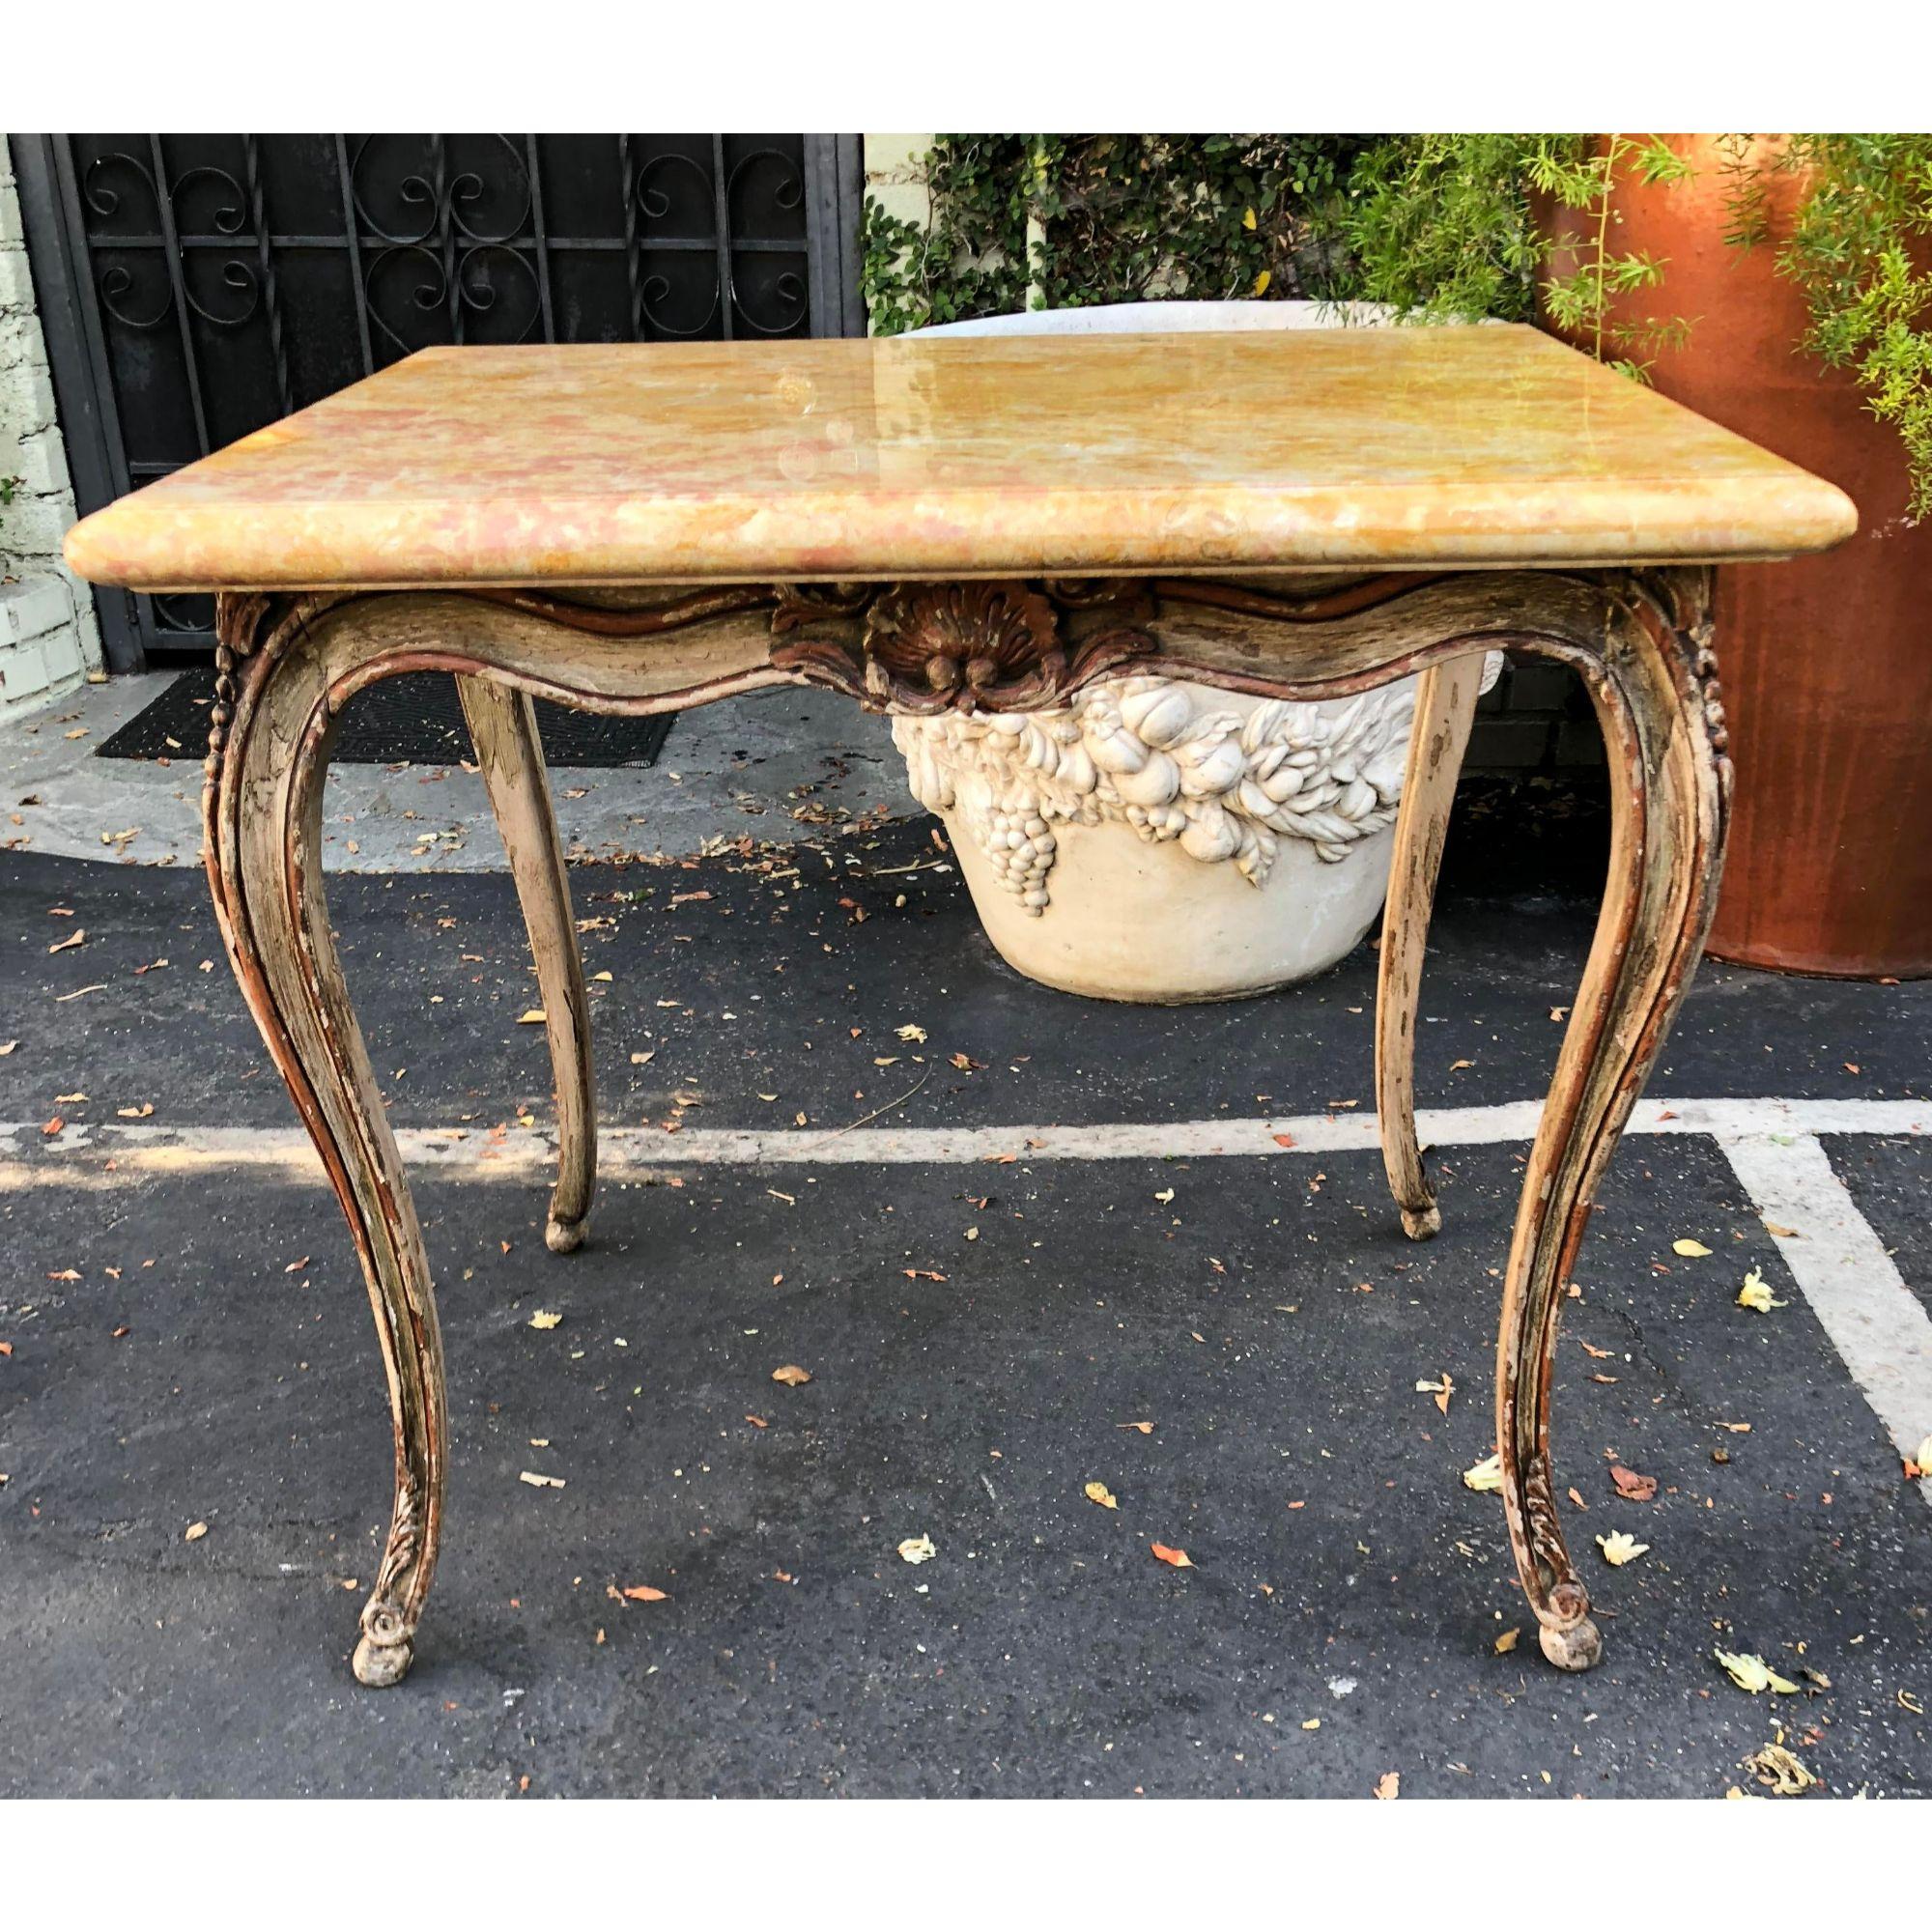 19th Century Antique Carved Italian Walnut Side Table with Sienna Marble Top